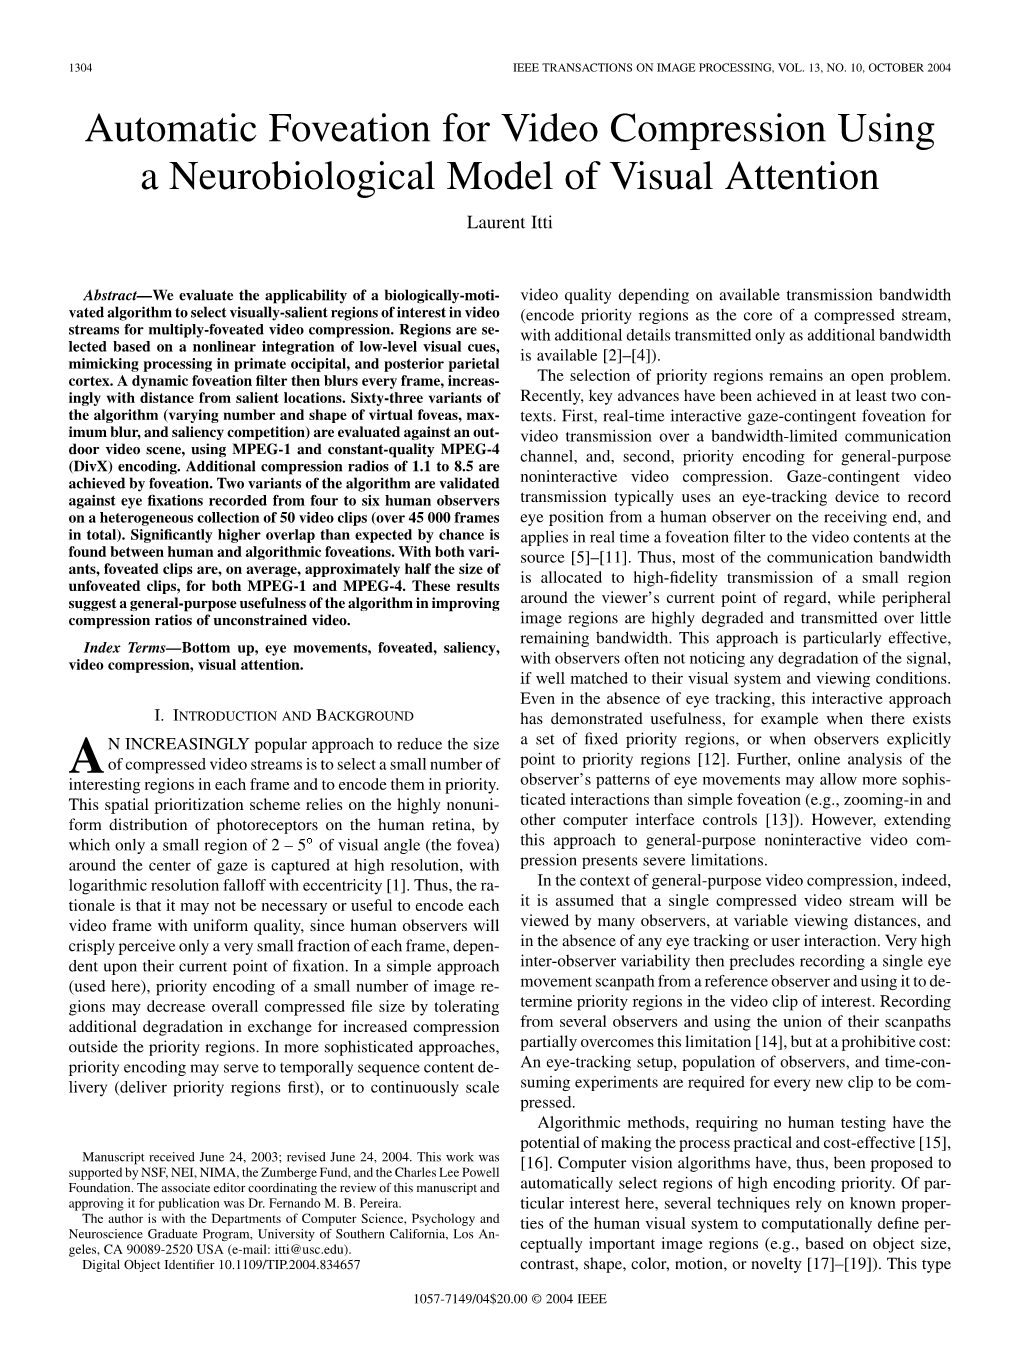 Automatic Foveation for Video Compression Using a Neurobiological Model of Visual Attention Laurent Itti